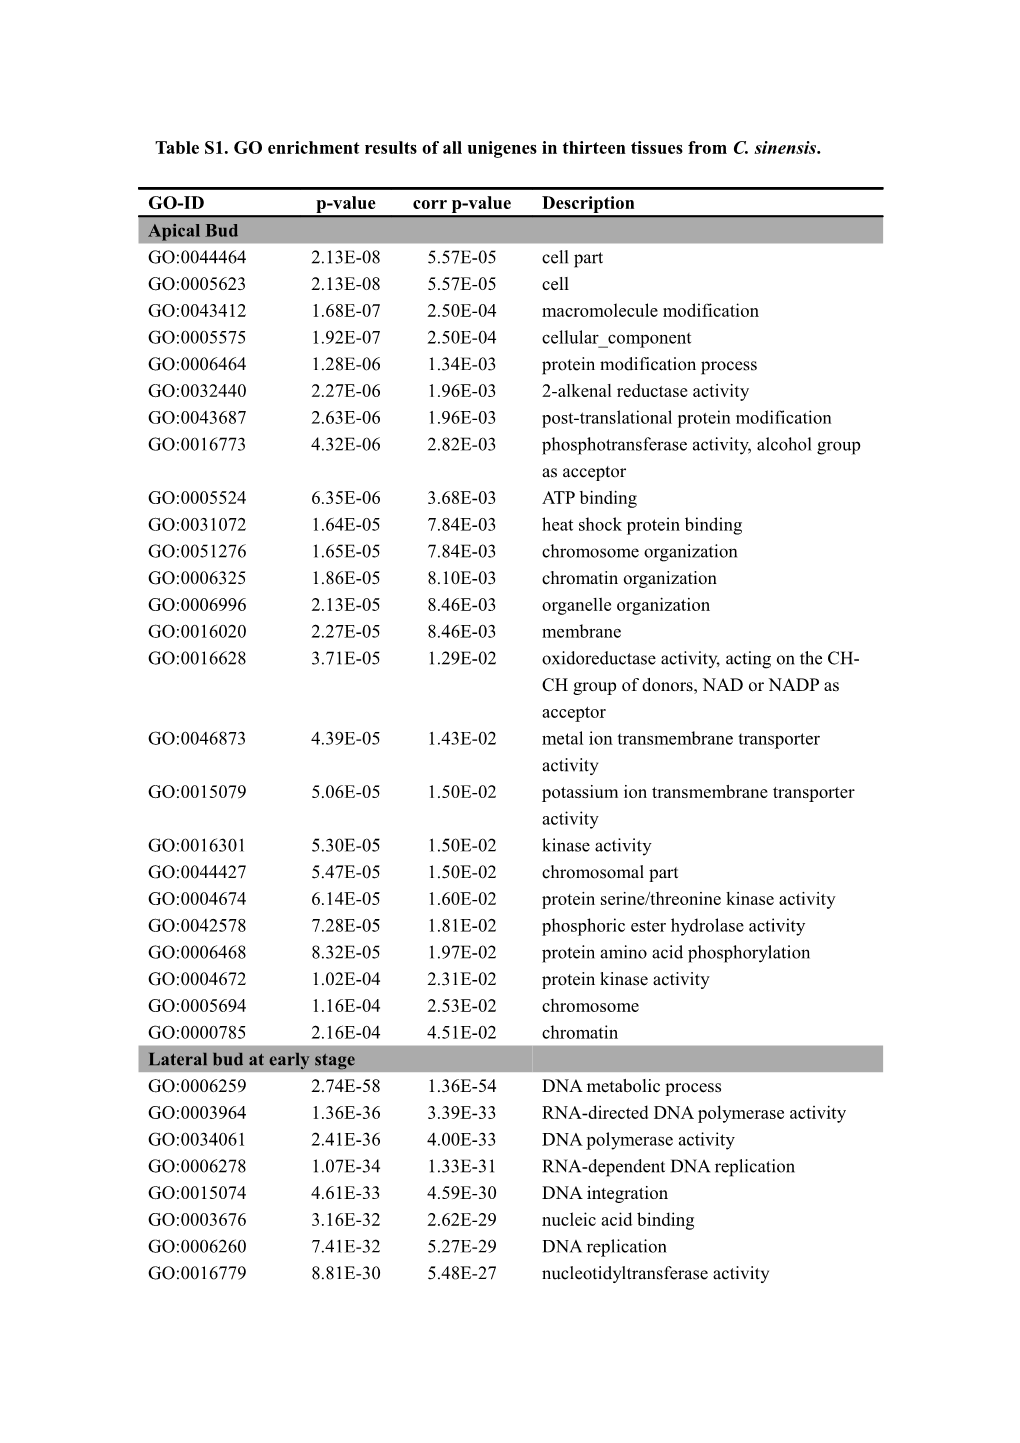 Table S1. GO Enrichment Results of All Unigenes in Thirteen Tissues from C. Sinensis